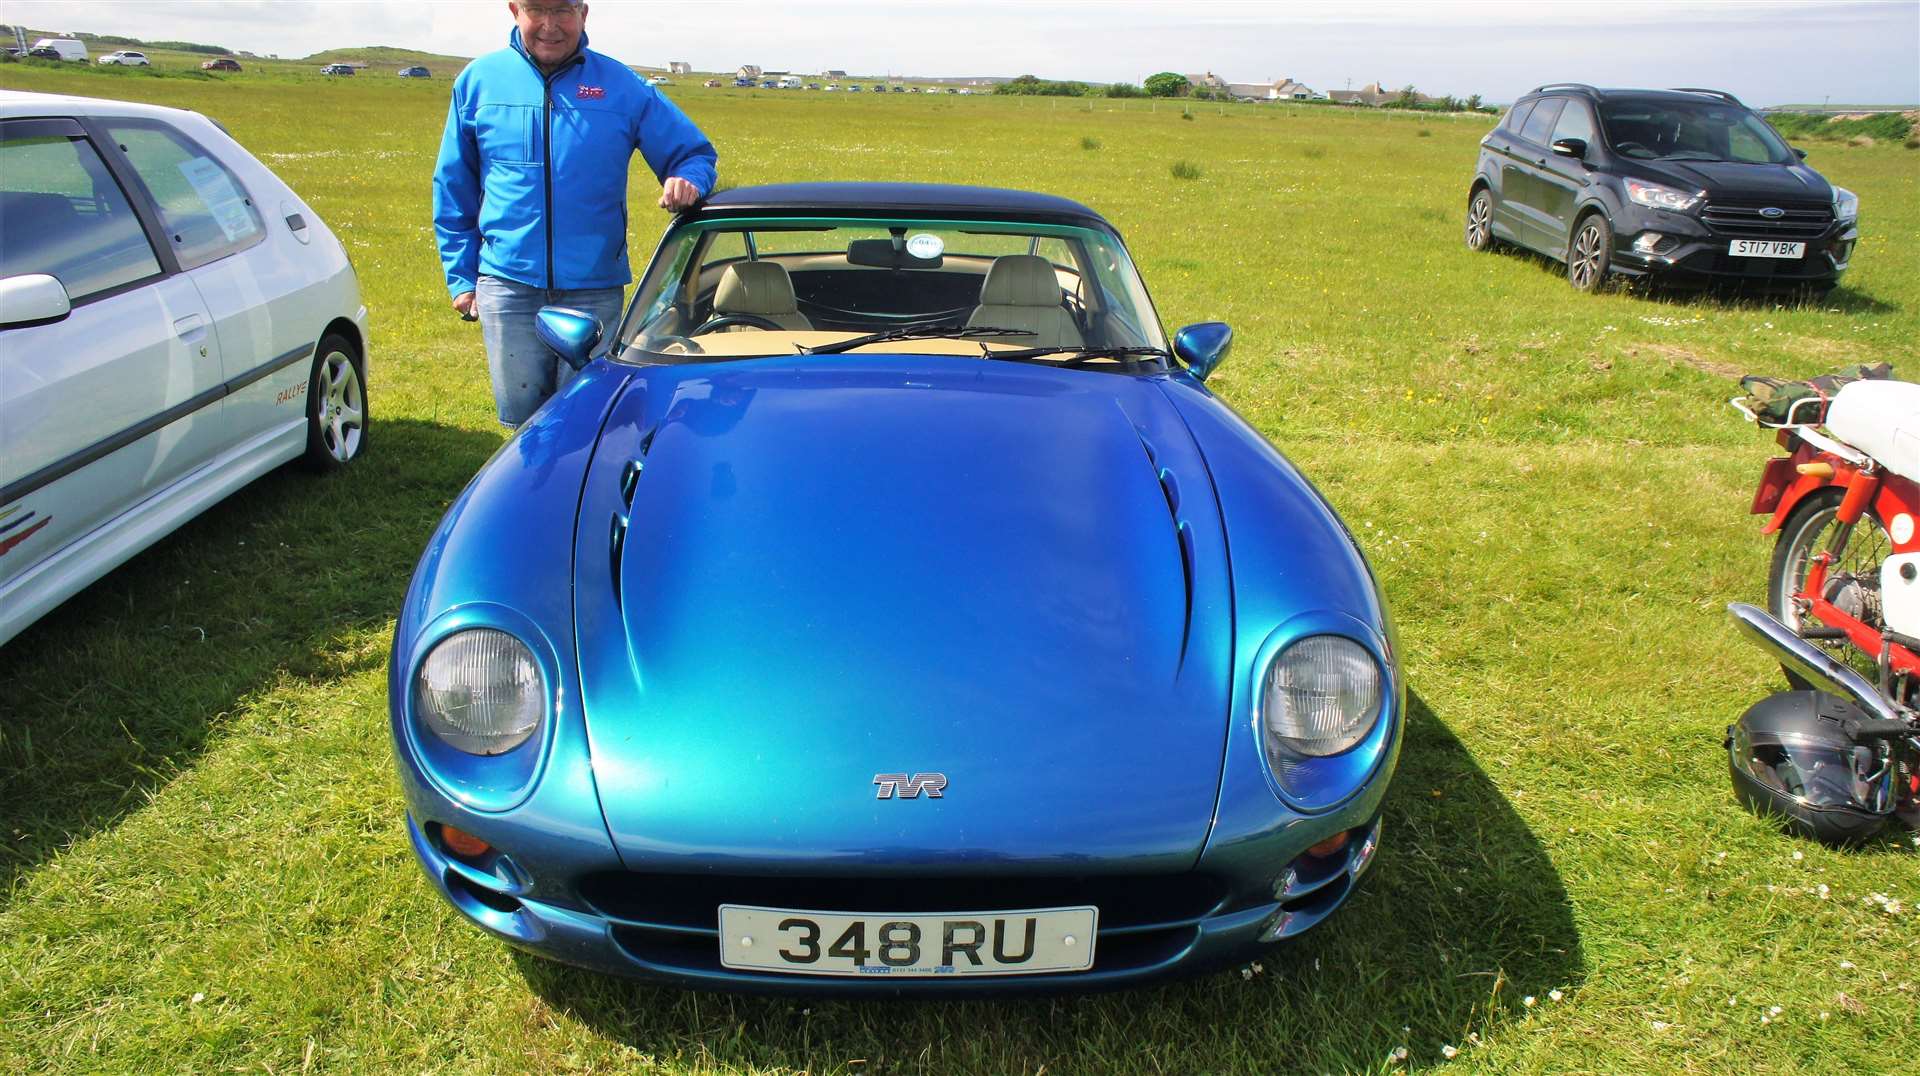 This classic TVR shone brightly in the beautiful sunshine. Picture: DGS